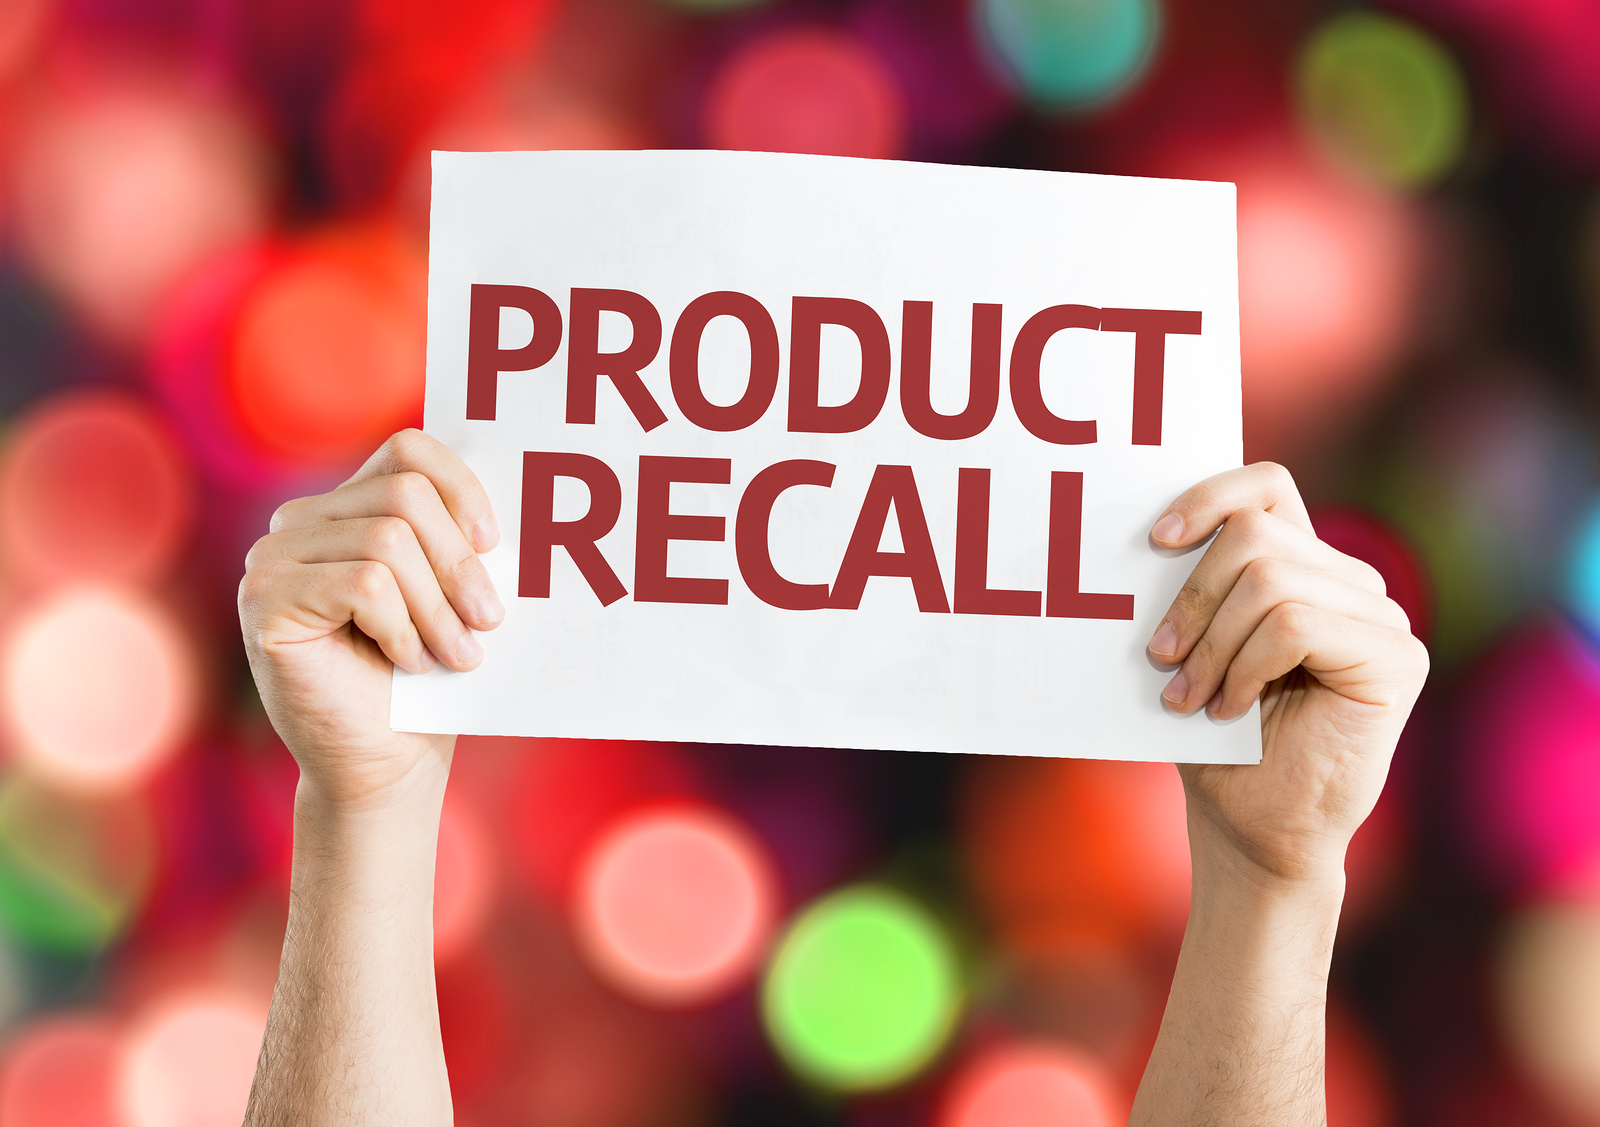 Survey Millennials Three Times as Likely to Ignore Product Recalls as